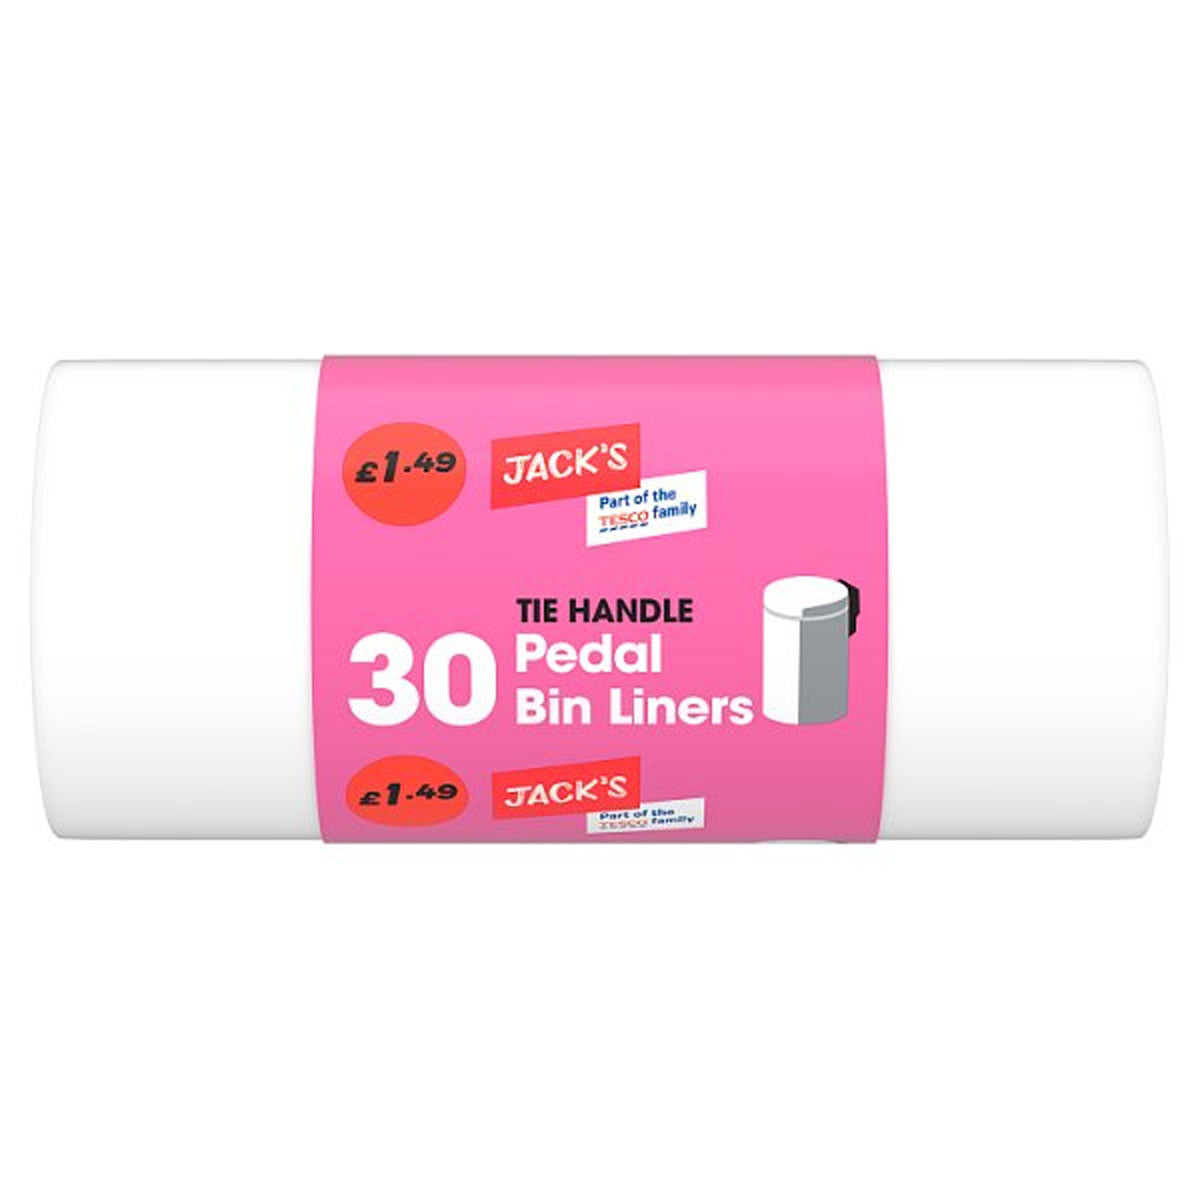 A roll of Jacks - Tie Handle Pedal Bin Liners - 30pcs on a pink background.